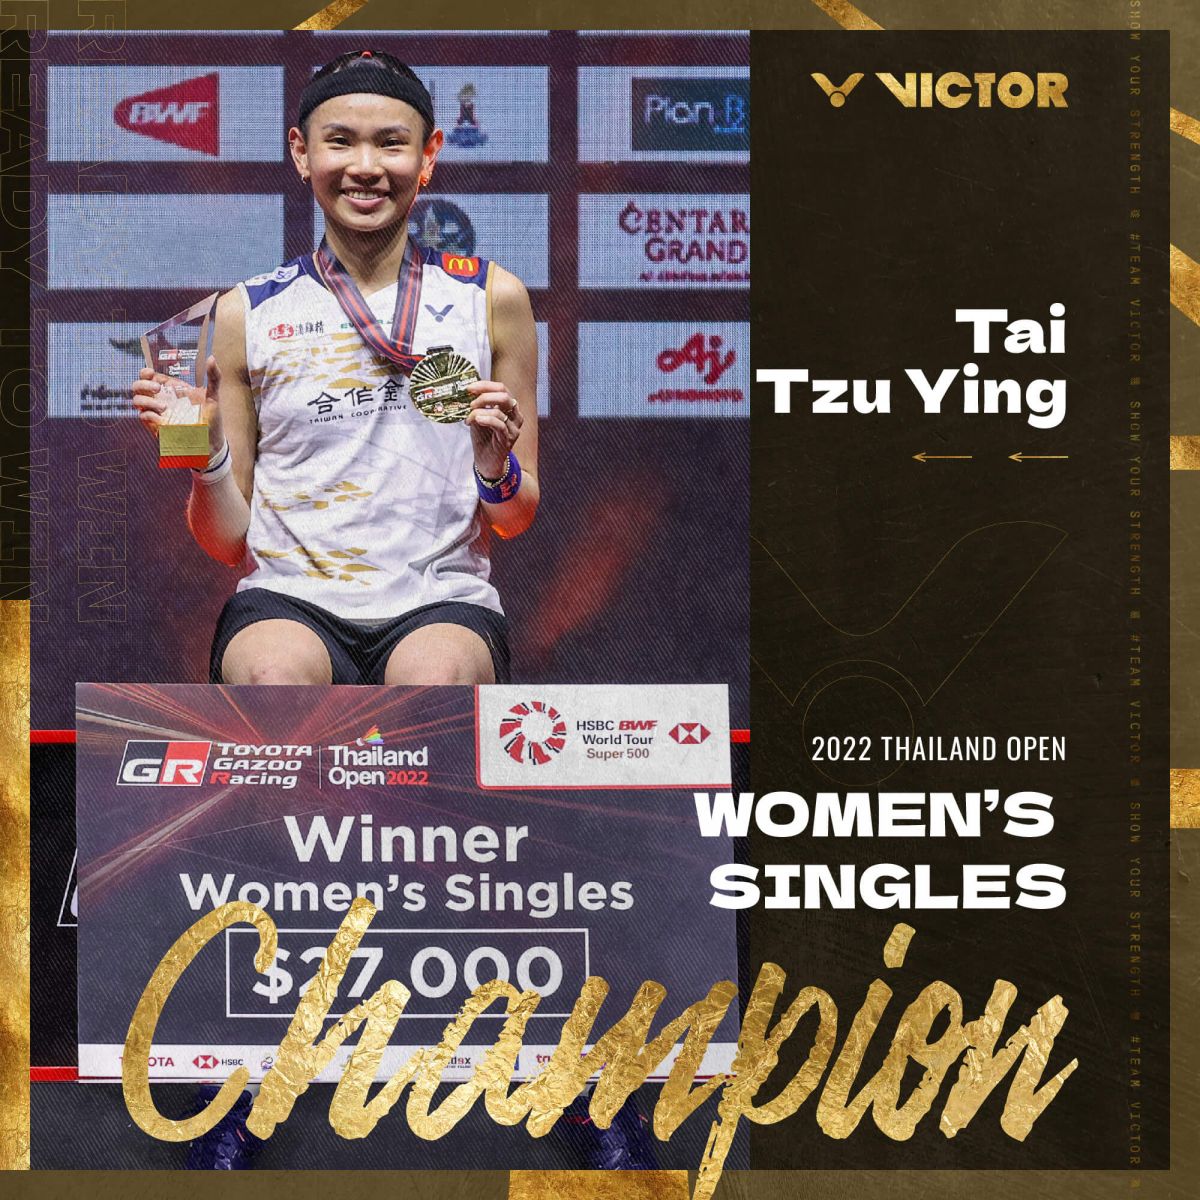 Tai Tzu Ying / Lee Zii Jia Took Two Titles at the Thailand Open